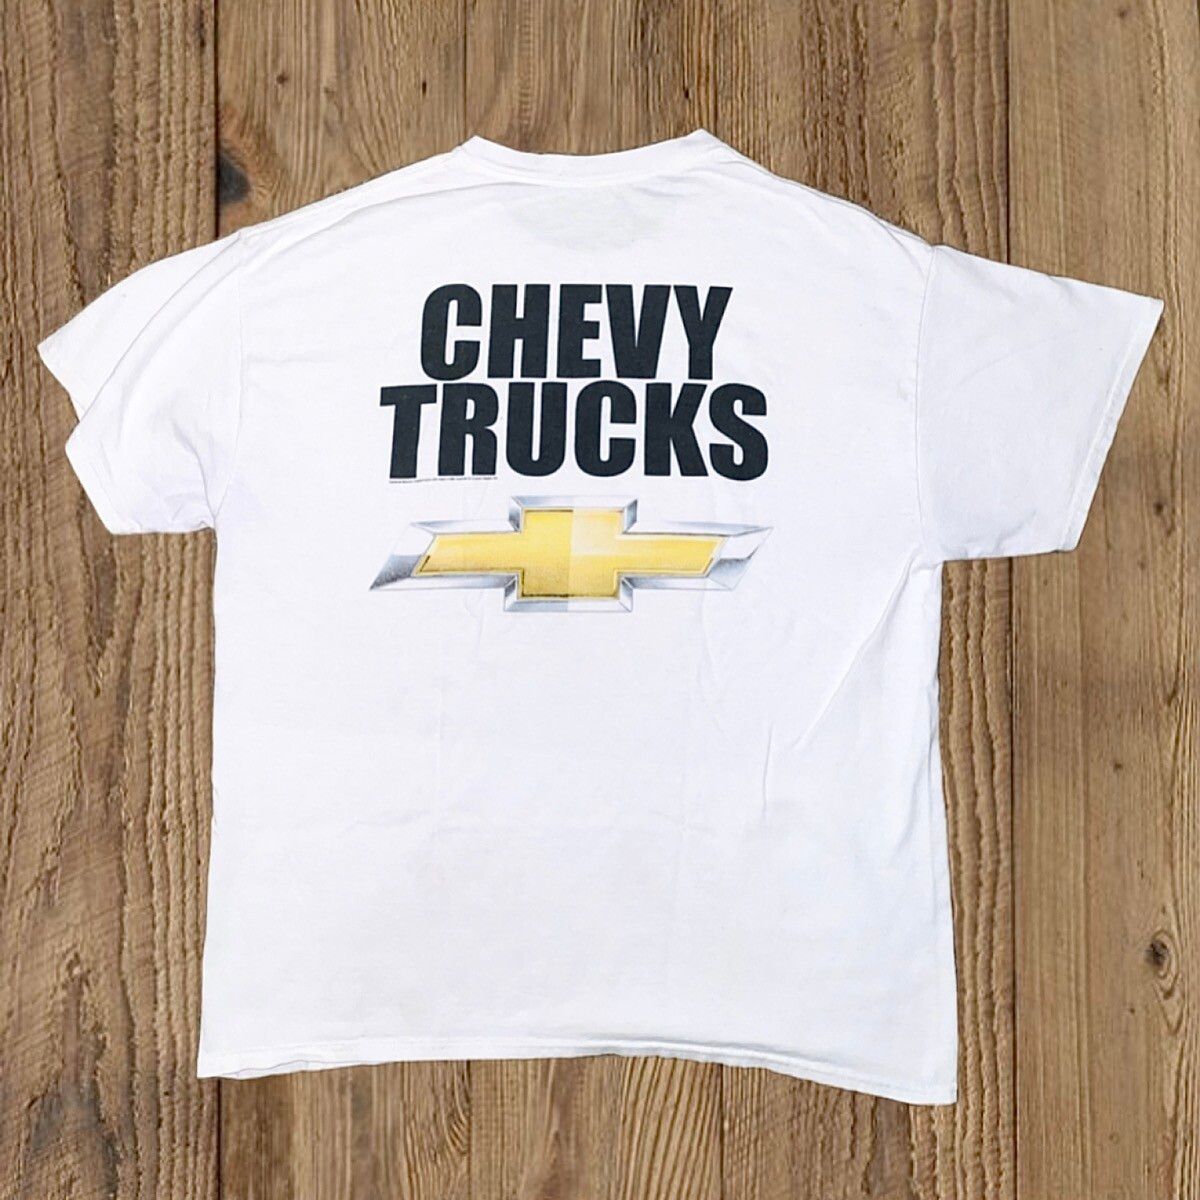 Chevy Vintage Chevy Trucker Shirt Size US L / EU 52-54 / 3 - 1 Preview